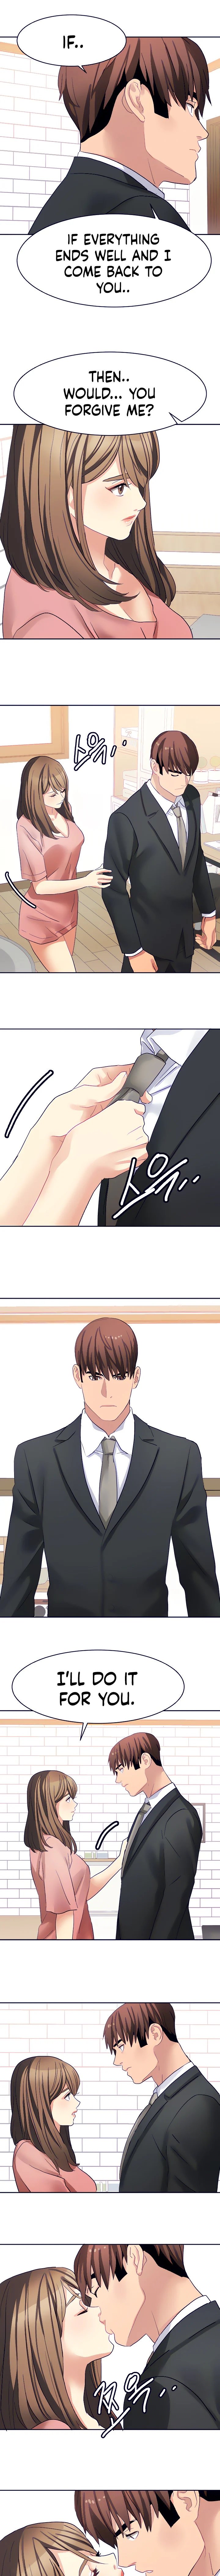 punishments-for-bad-girls-chap-31-4